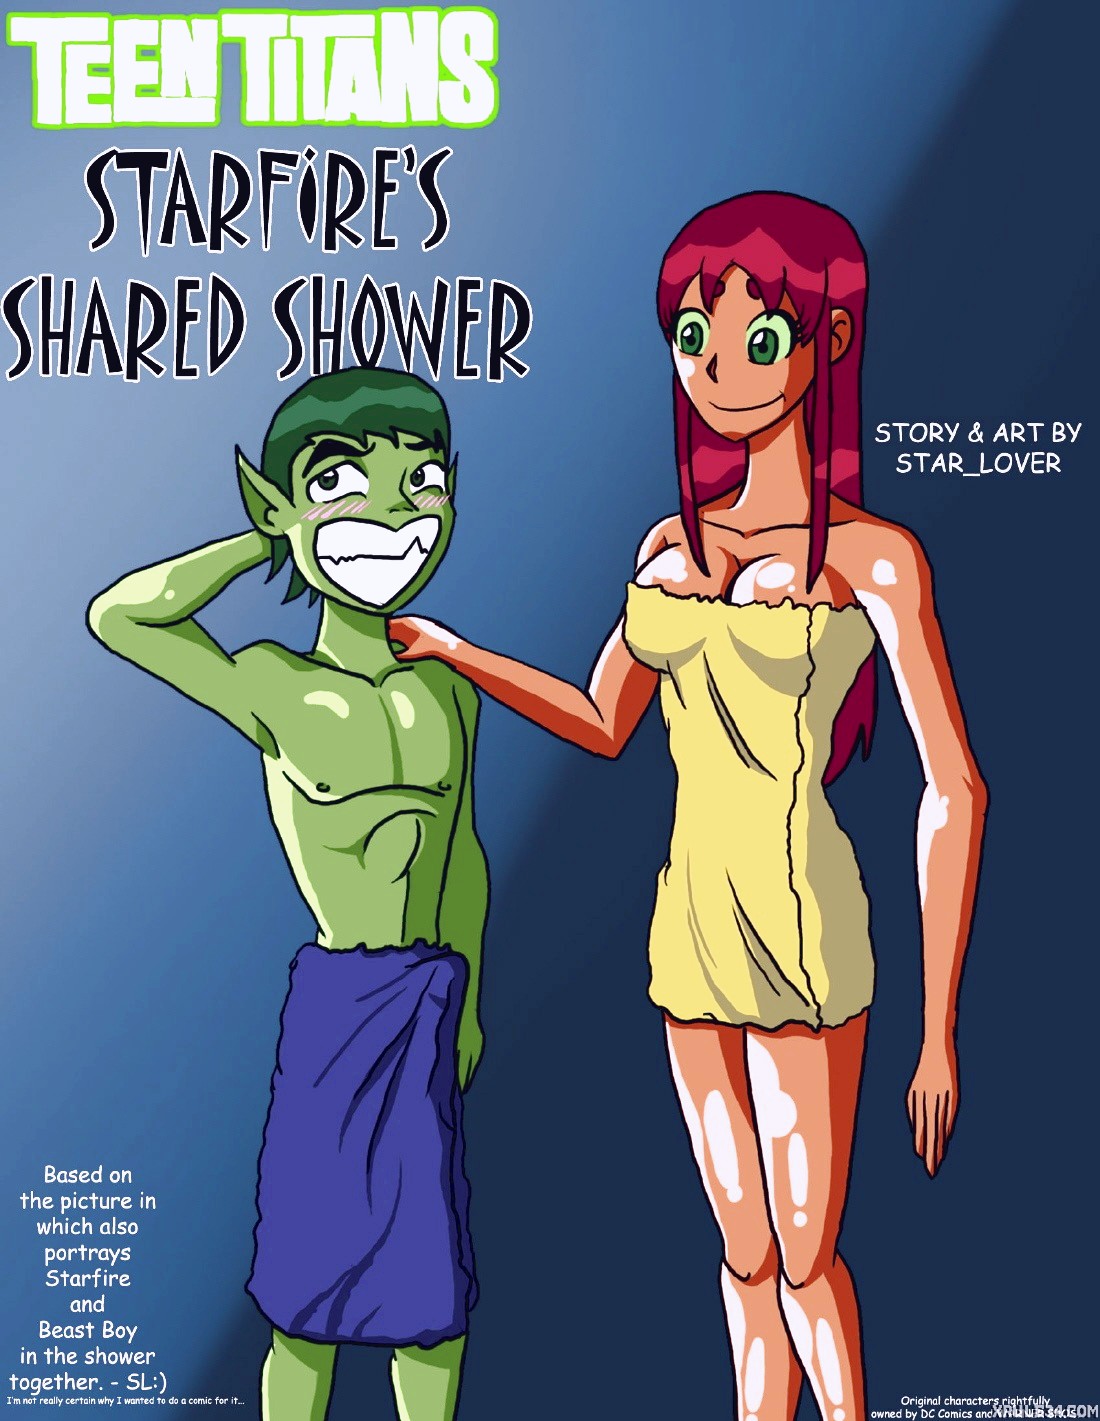 Starfire's Shared Shower porn comic page 01 on category Teen Titans